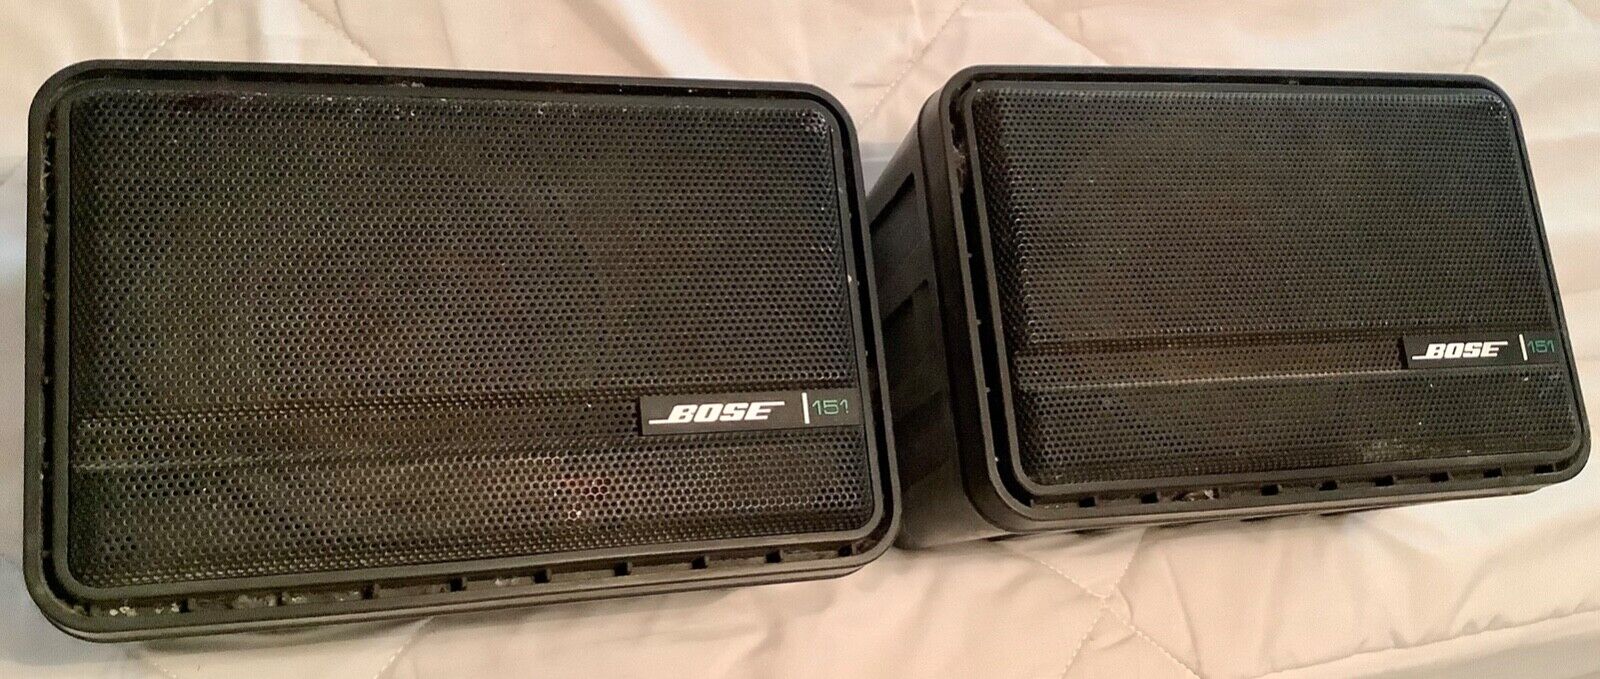 Bose 151 Environmental Indoor/Outdoor Speakers Black Tested and works